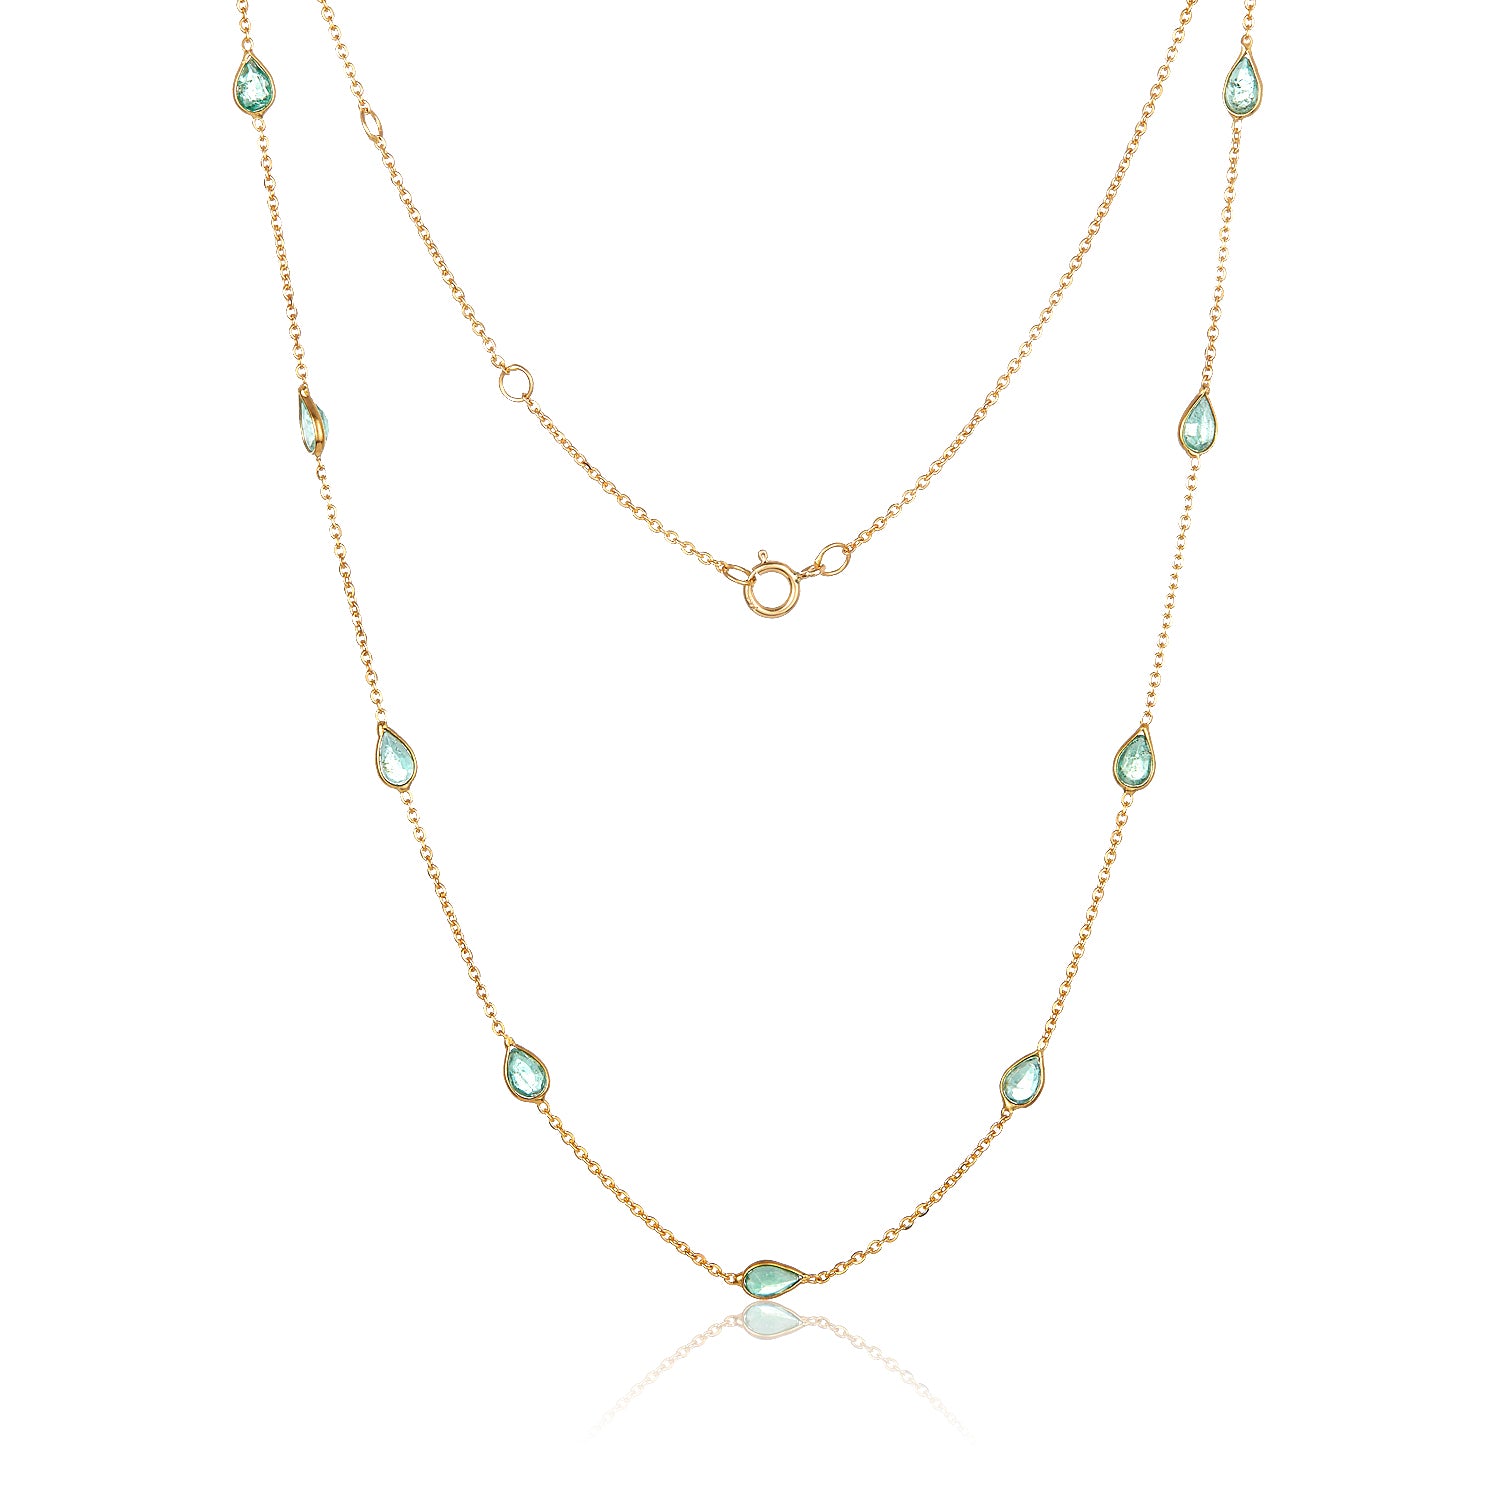 Mabel Chong Ombre Emerald Diamond Lock Necklace